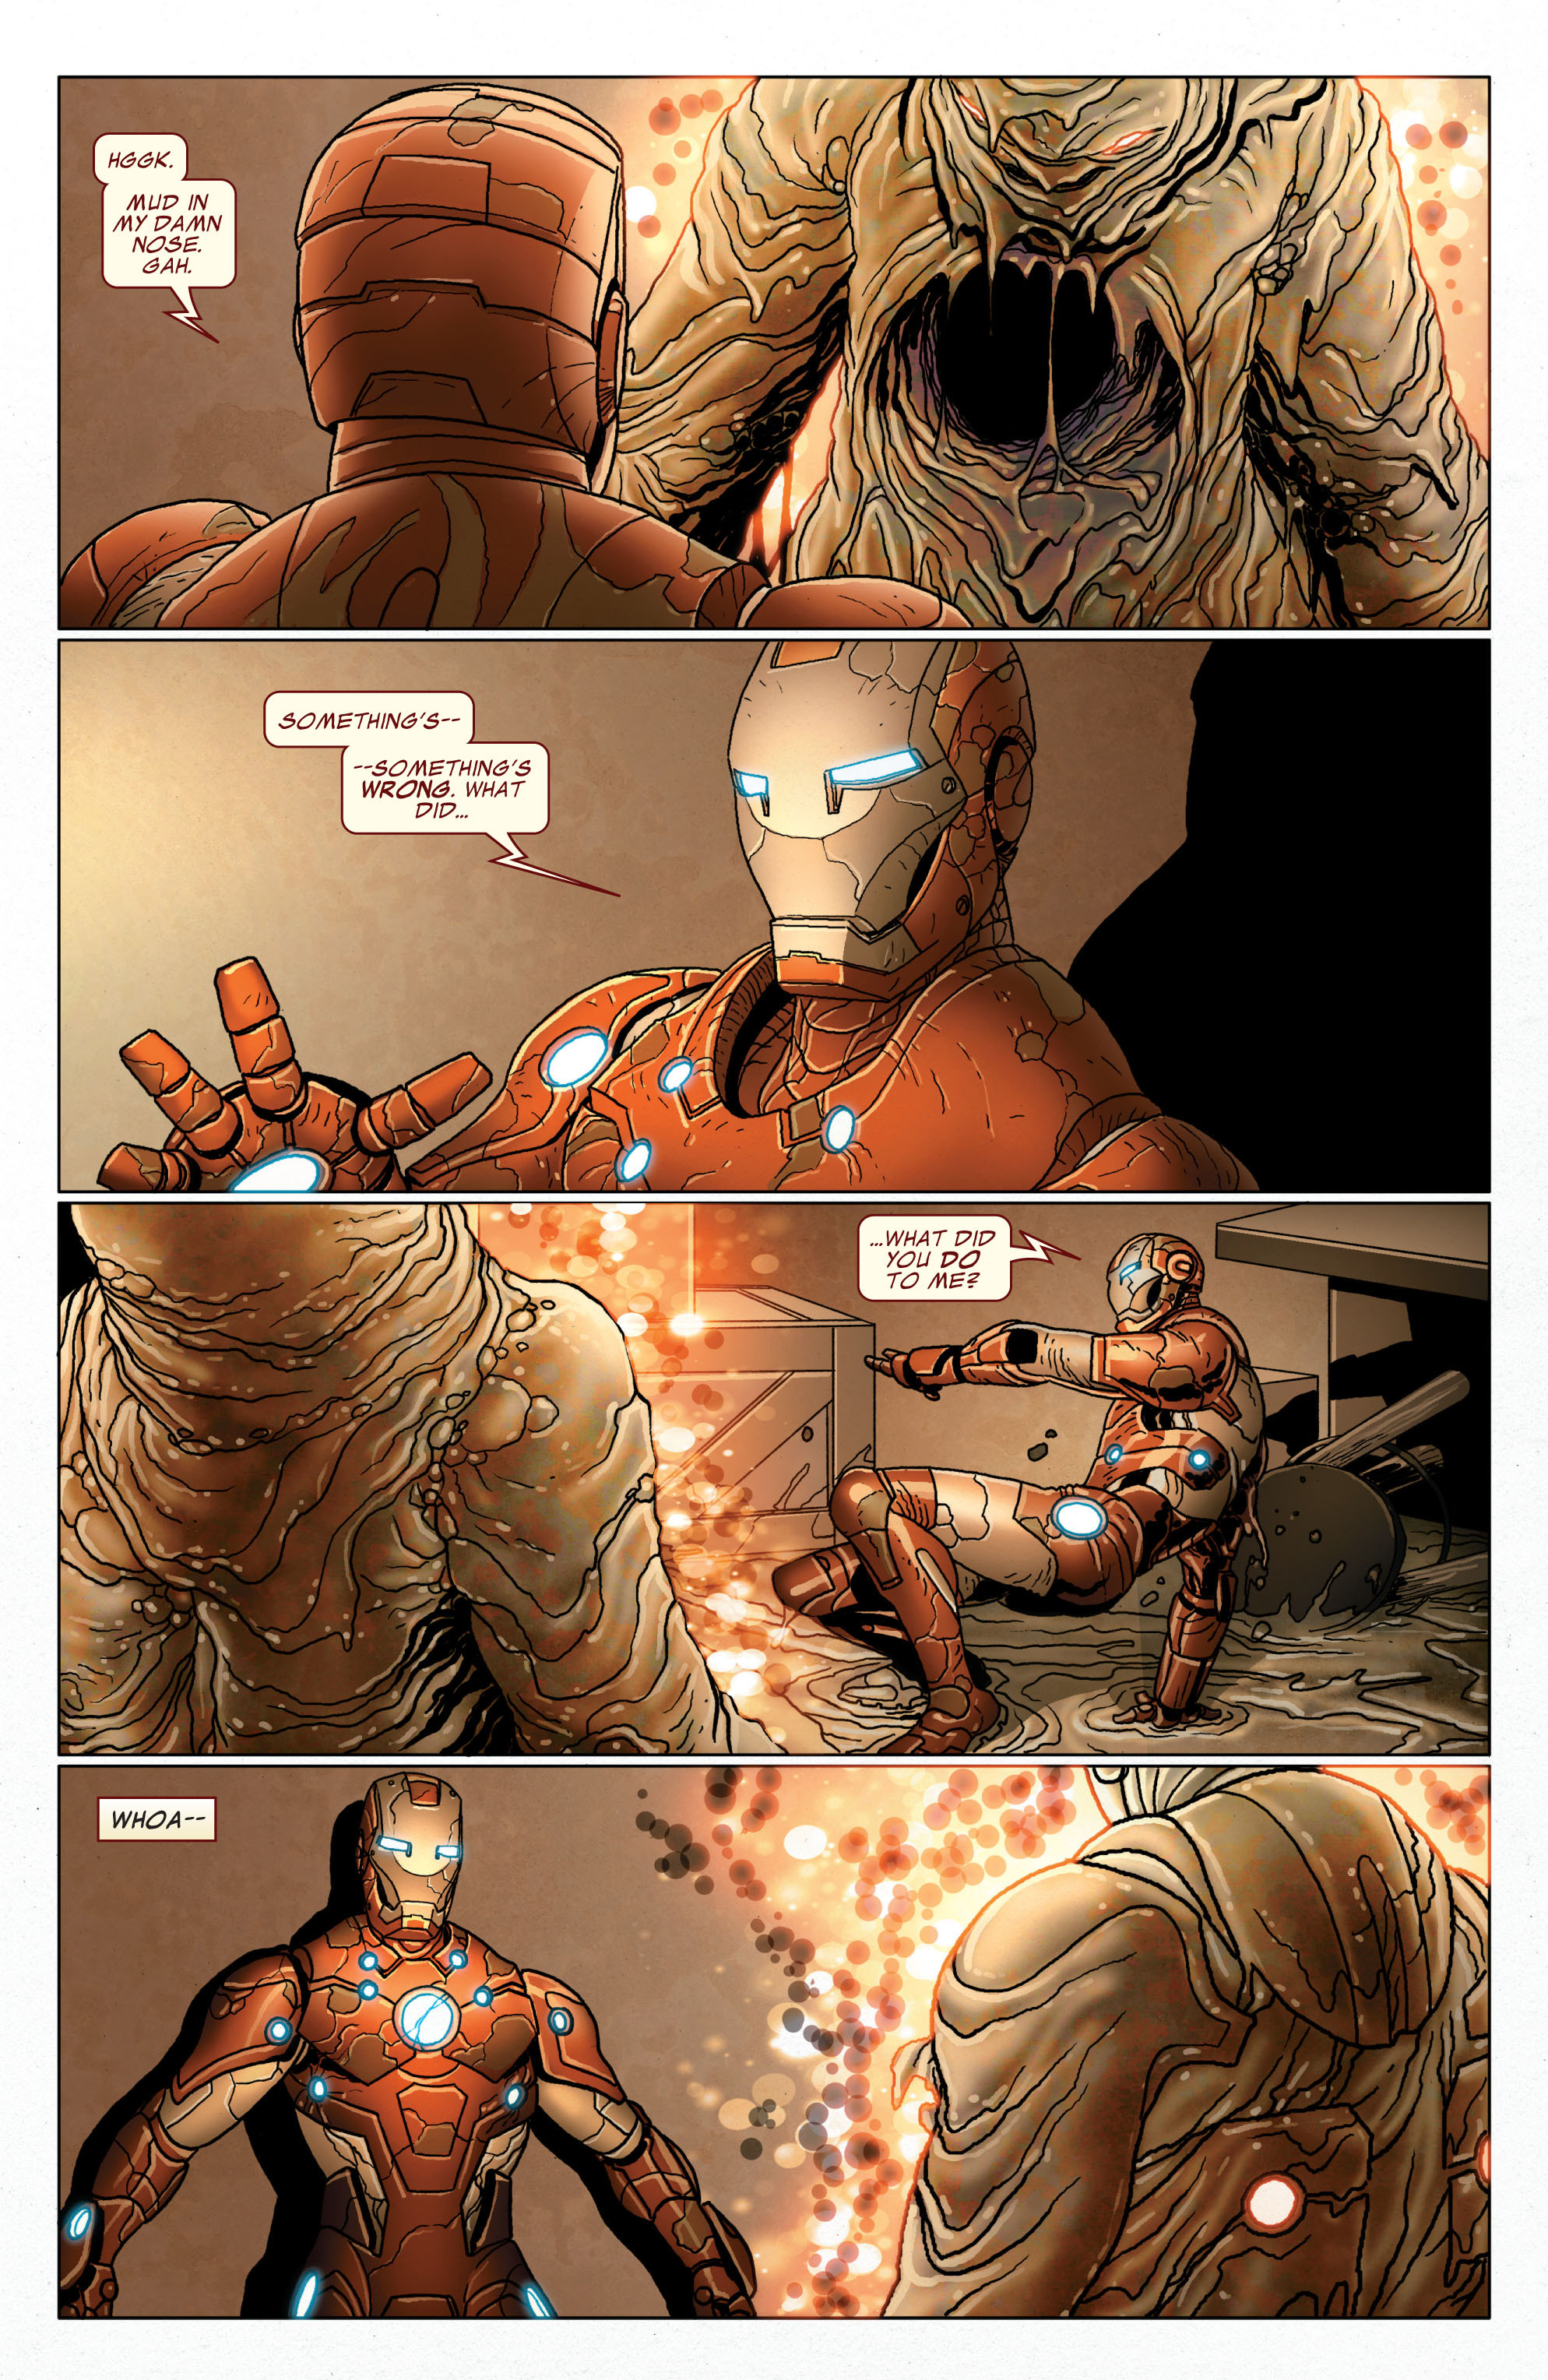 Invincible Iron Man (2008) 508 Page 4